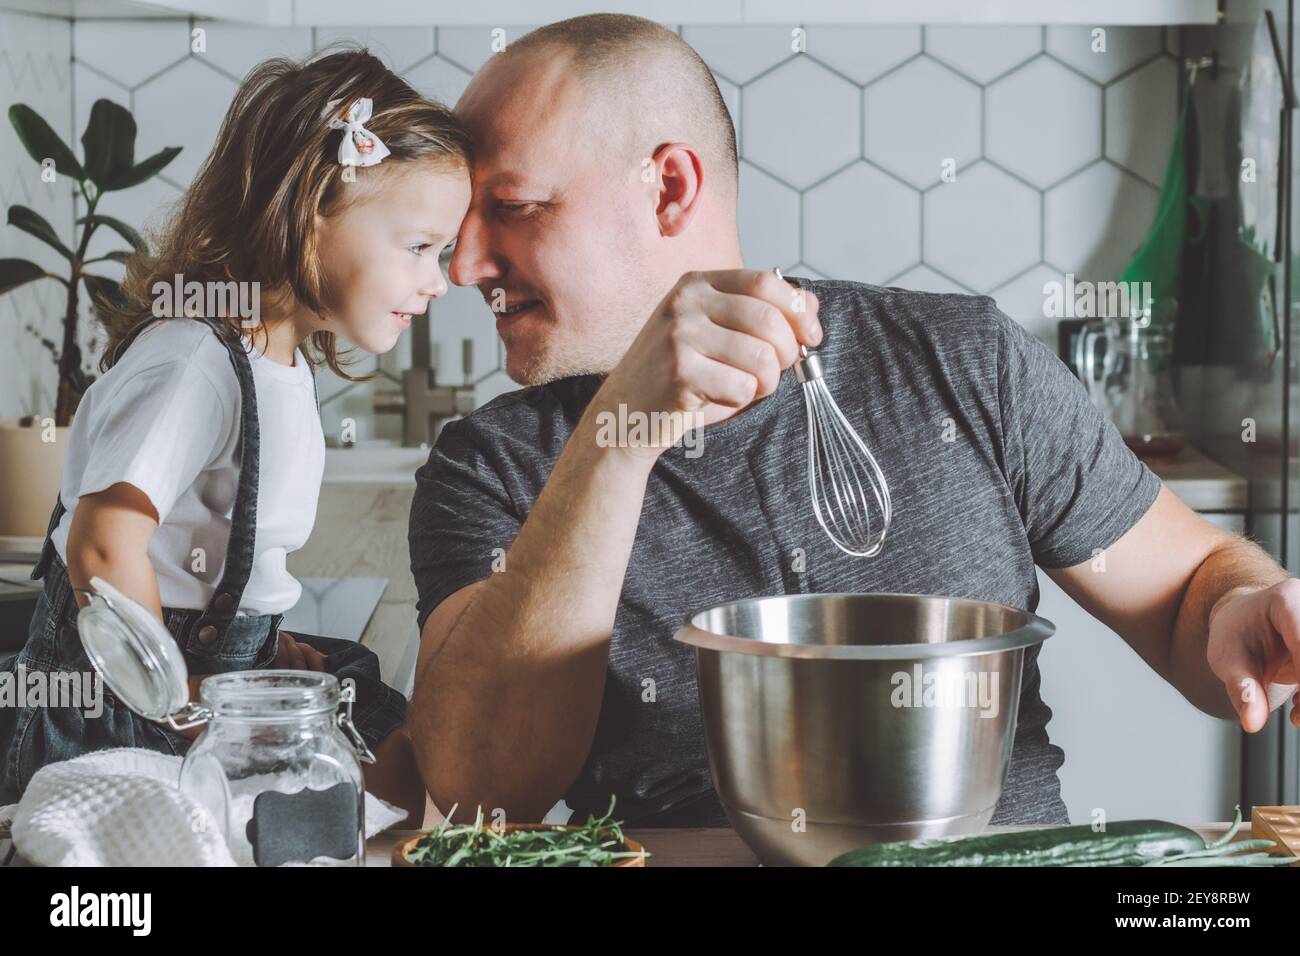 Father whips omelet with whisk, playing with daughter. Man doing chores. Stock Photo